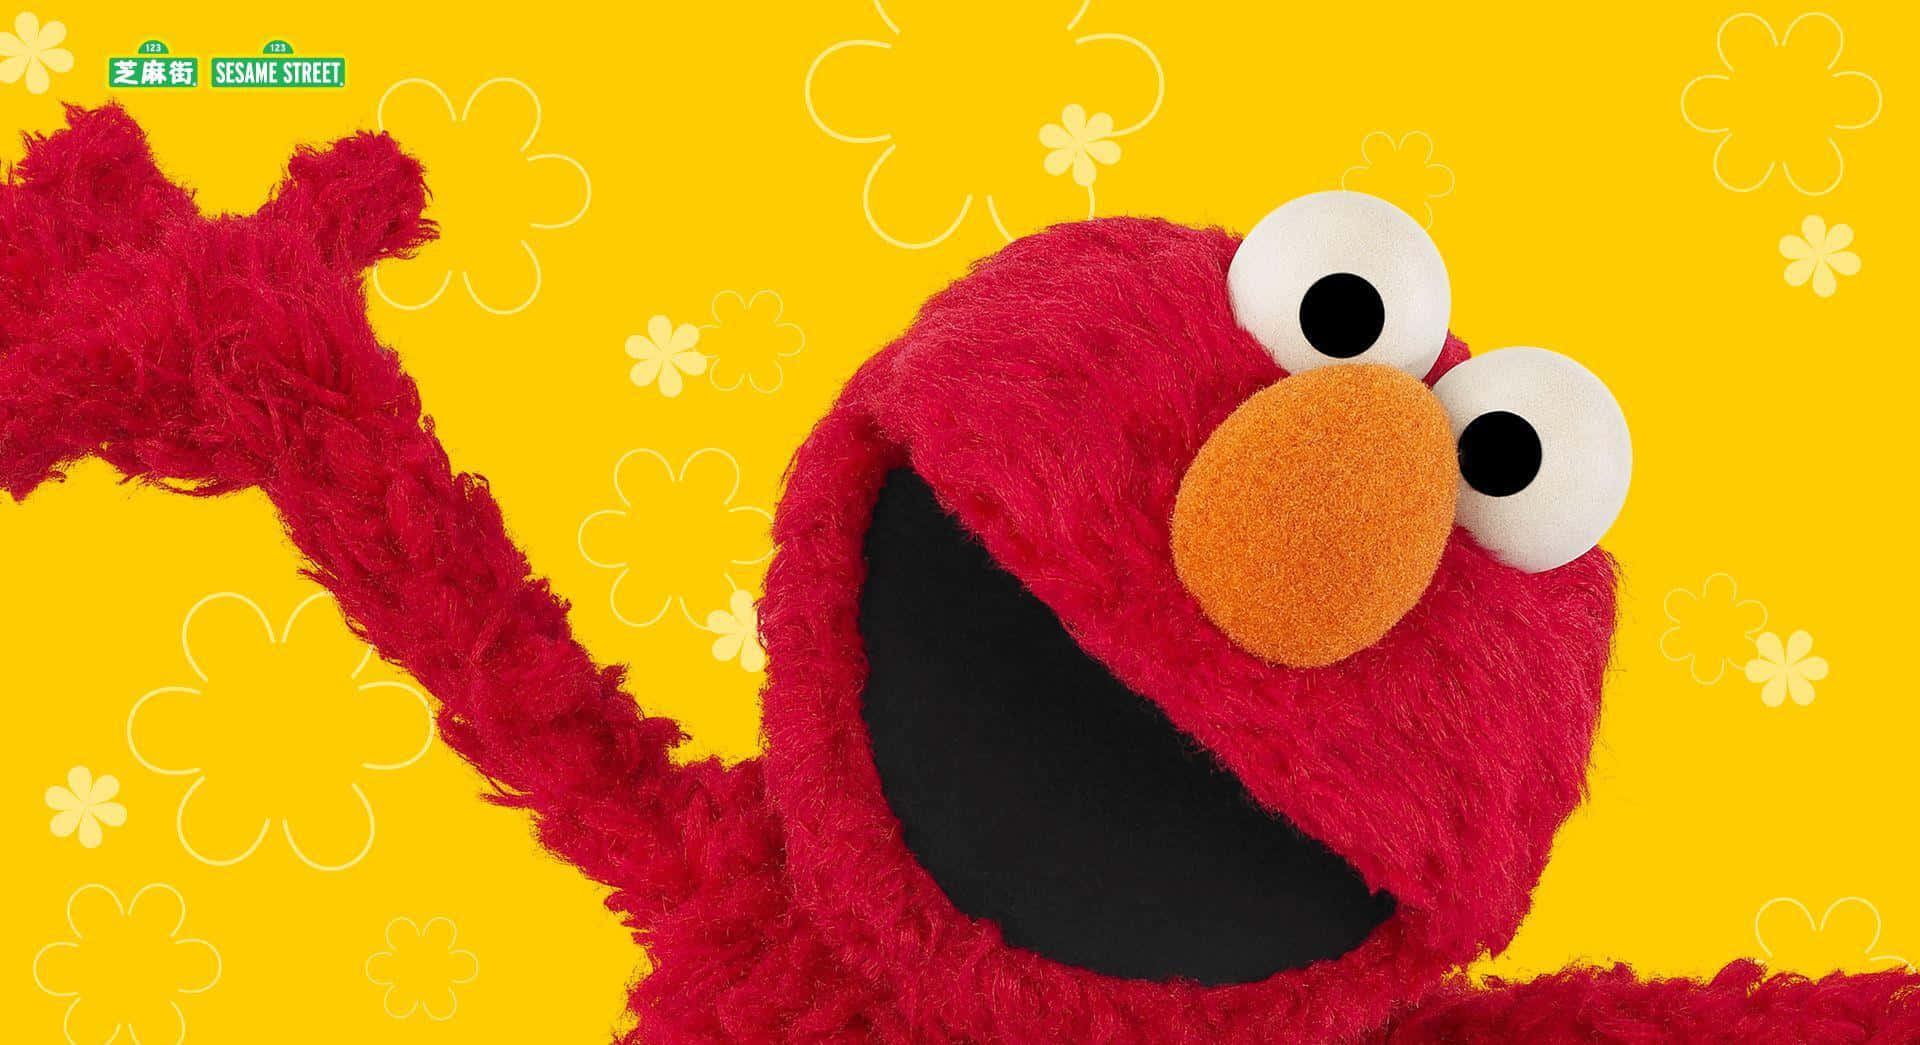 Elmo from Sesame Street, a Ray of Sunshine